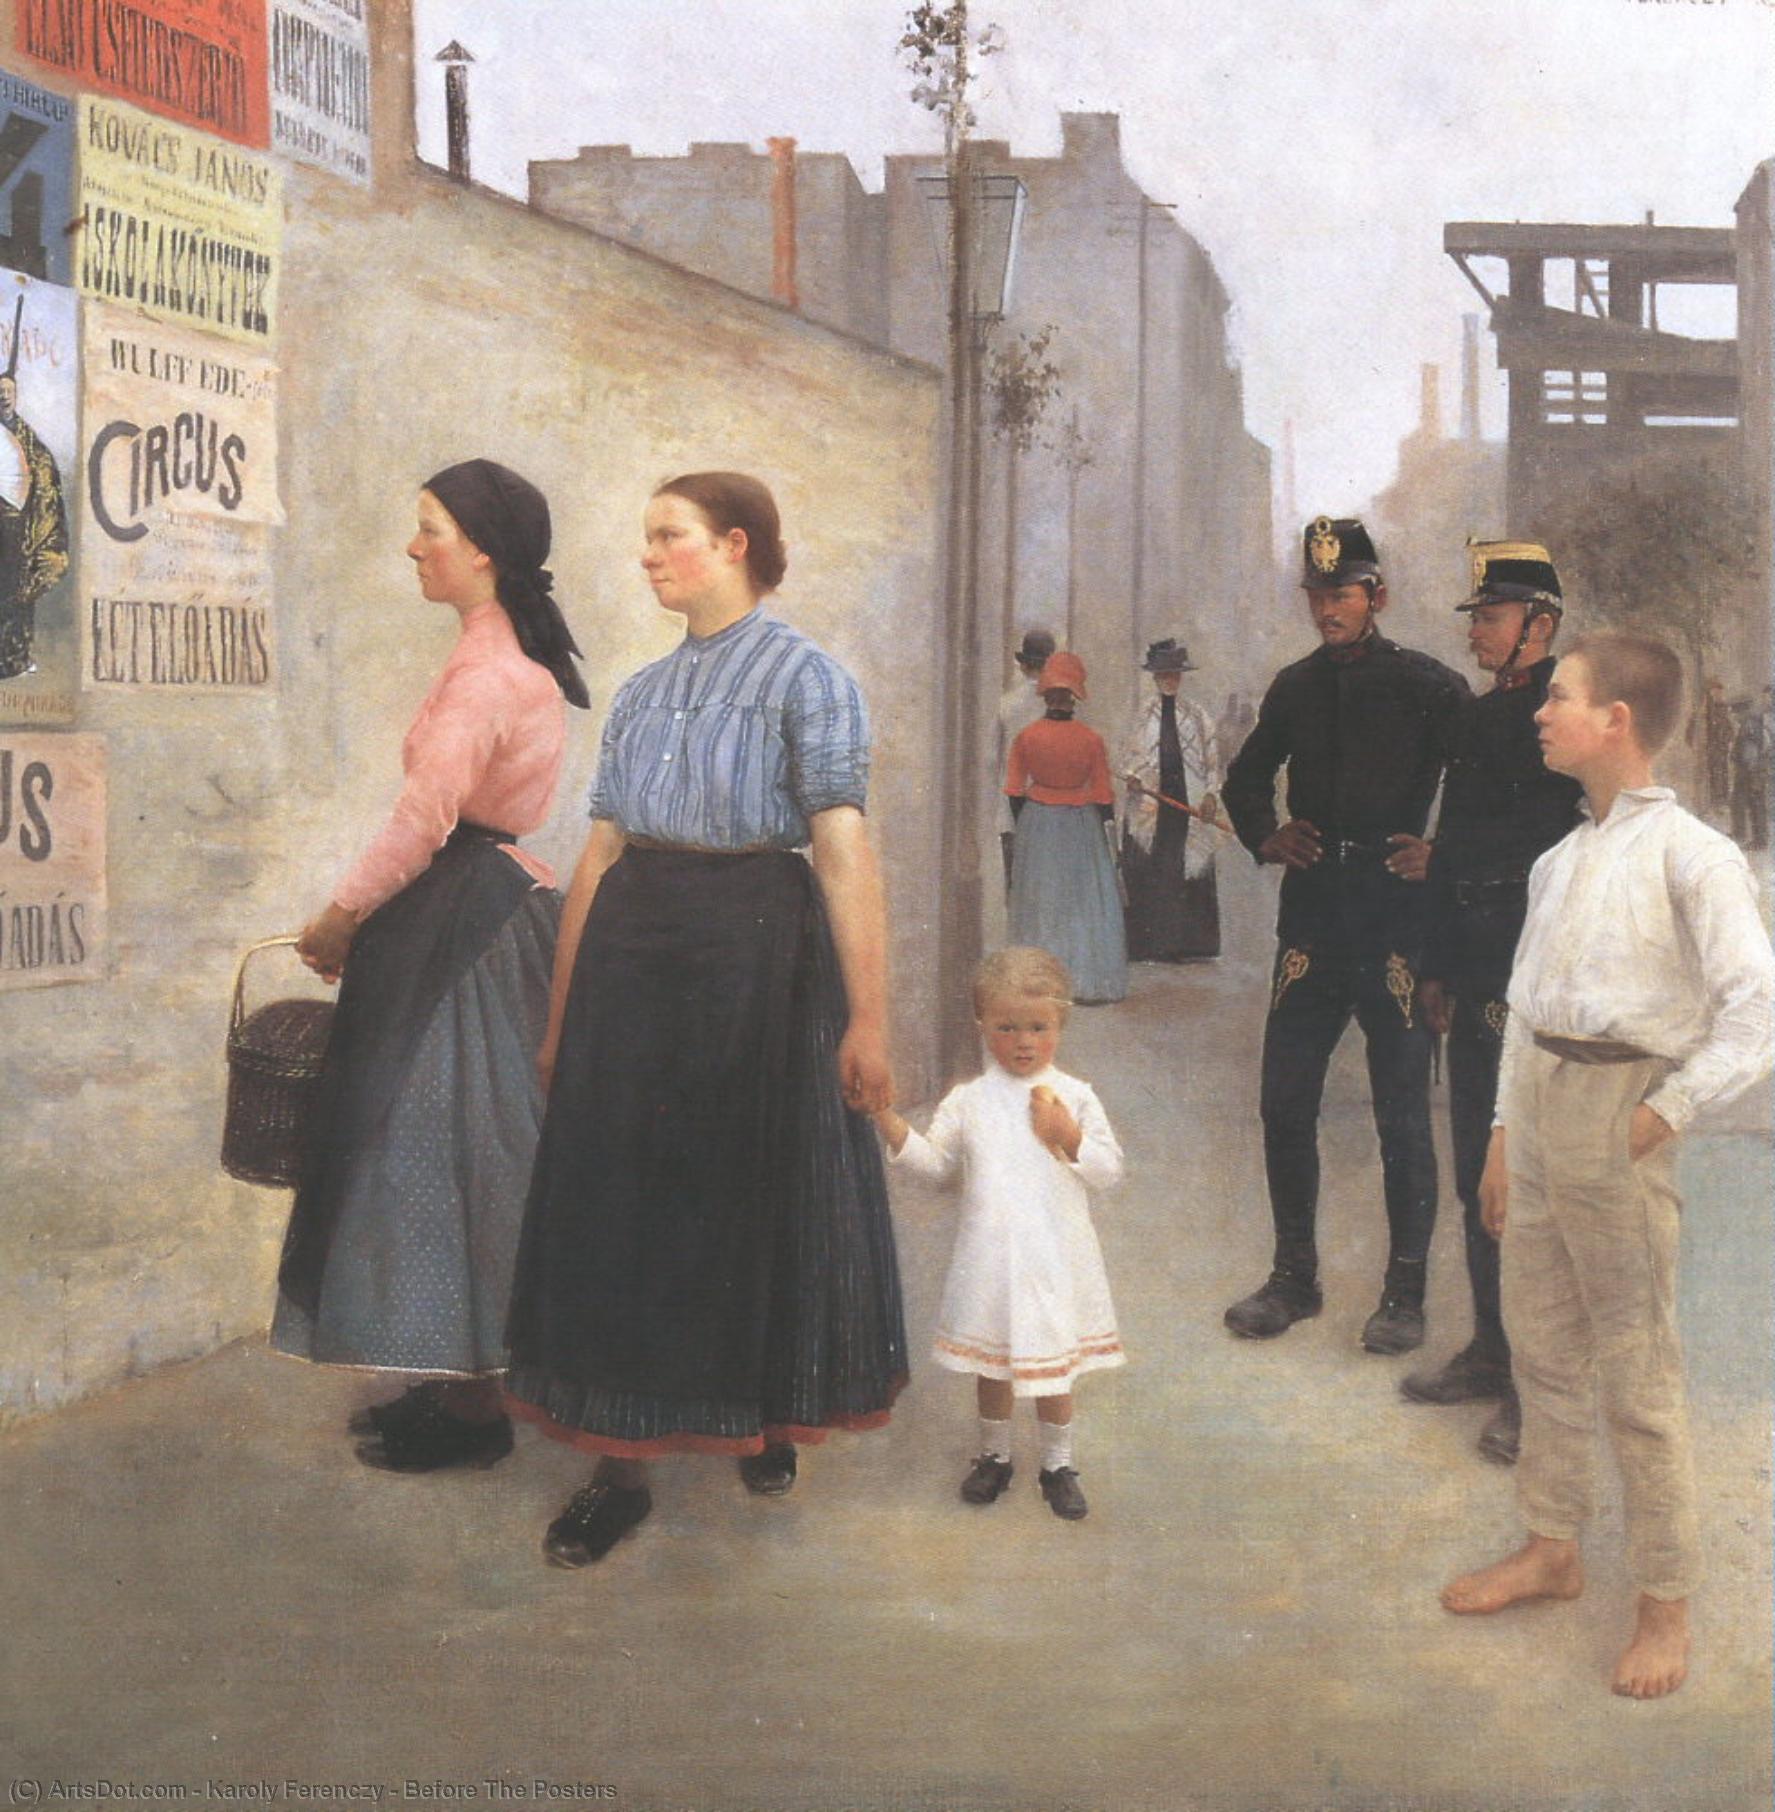 WikiOO.org - 백과 사전 - 회화, 삽화 Karoly Ferenczy - Before The Posters